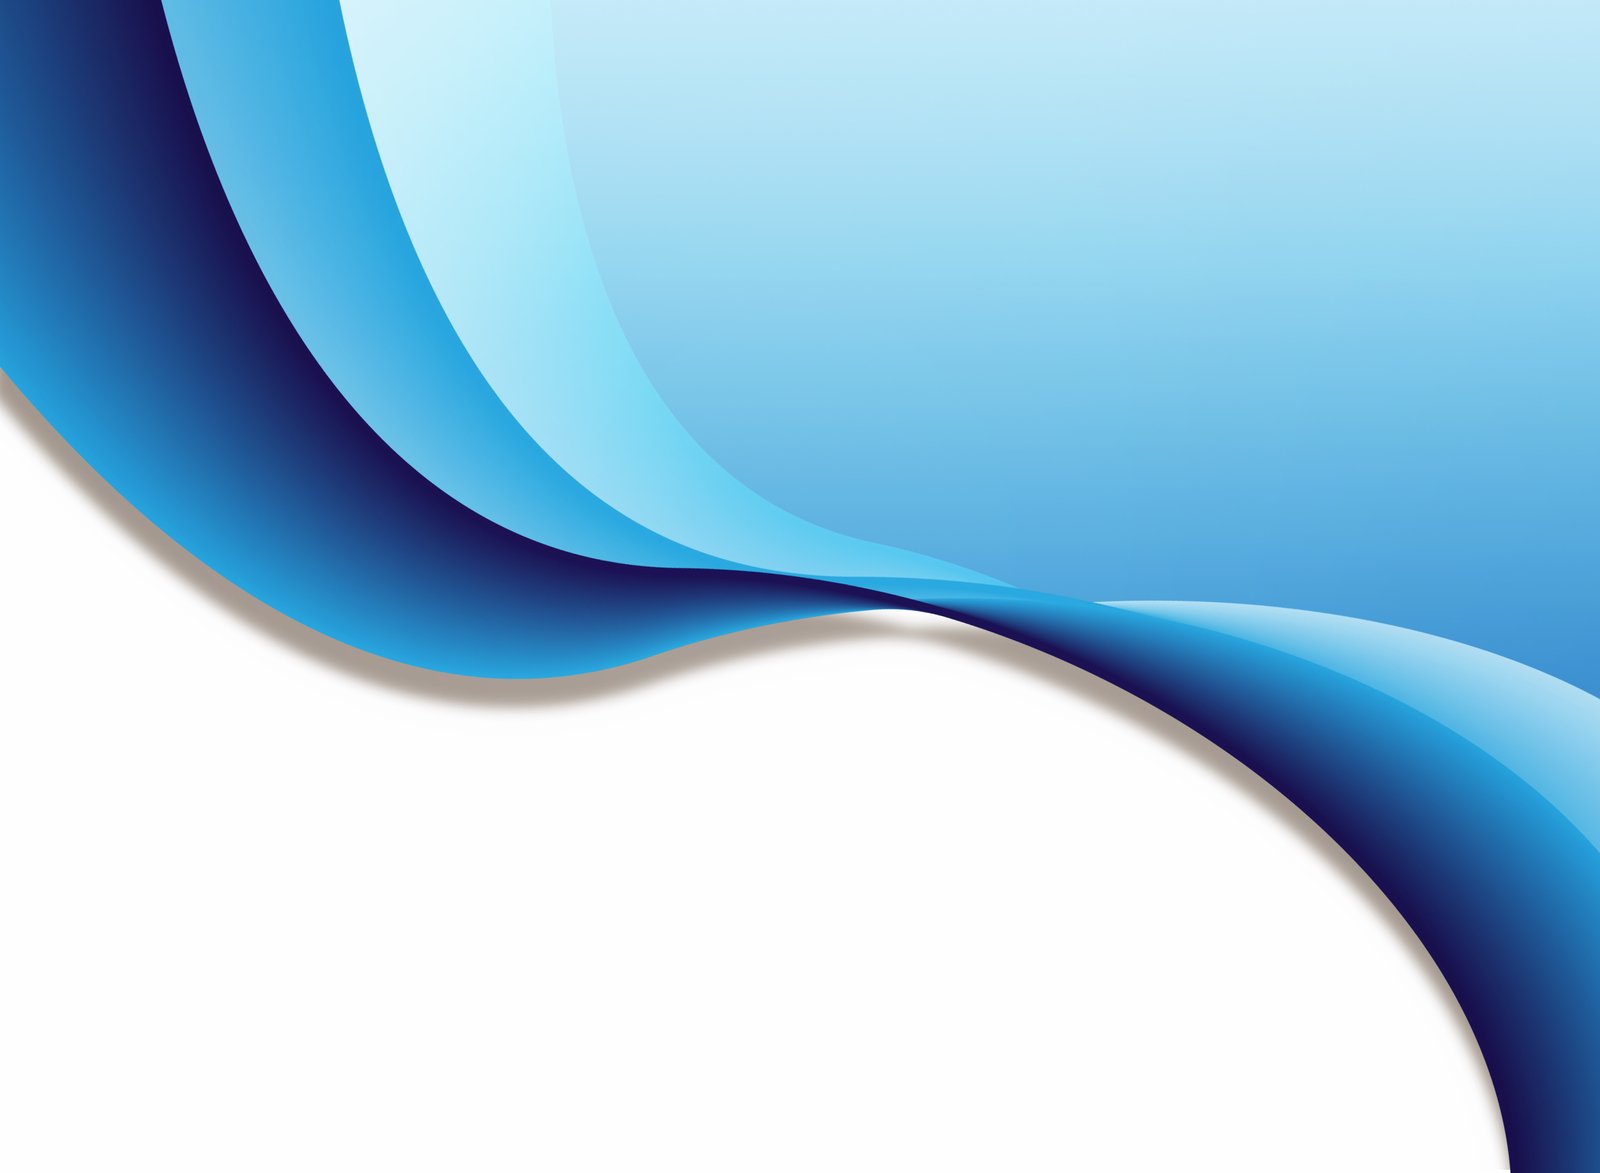 an abstract blue wave design with an orange center